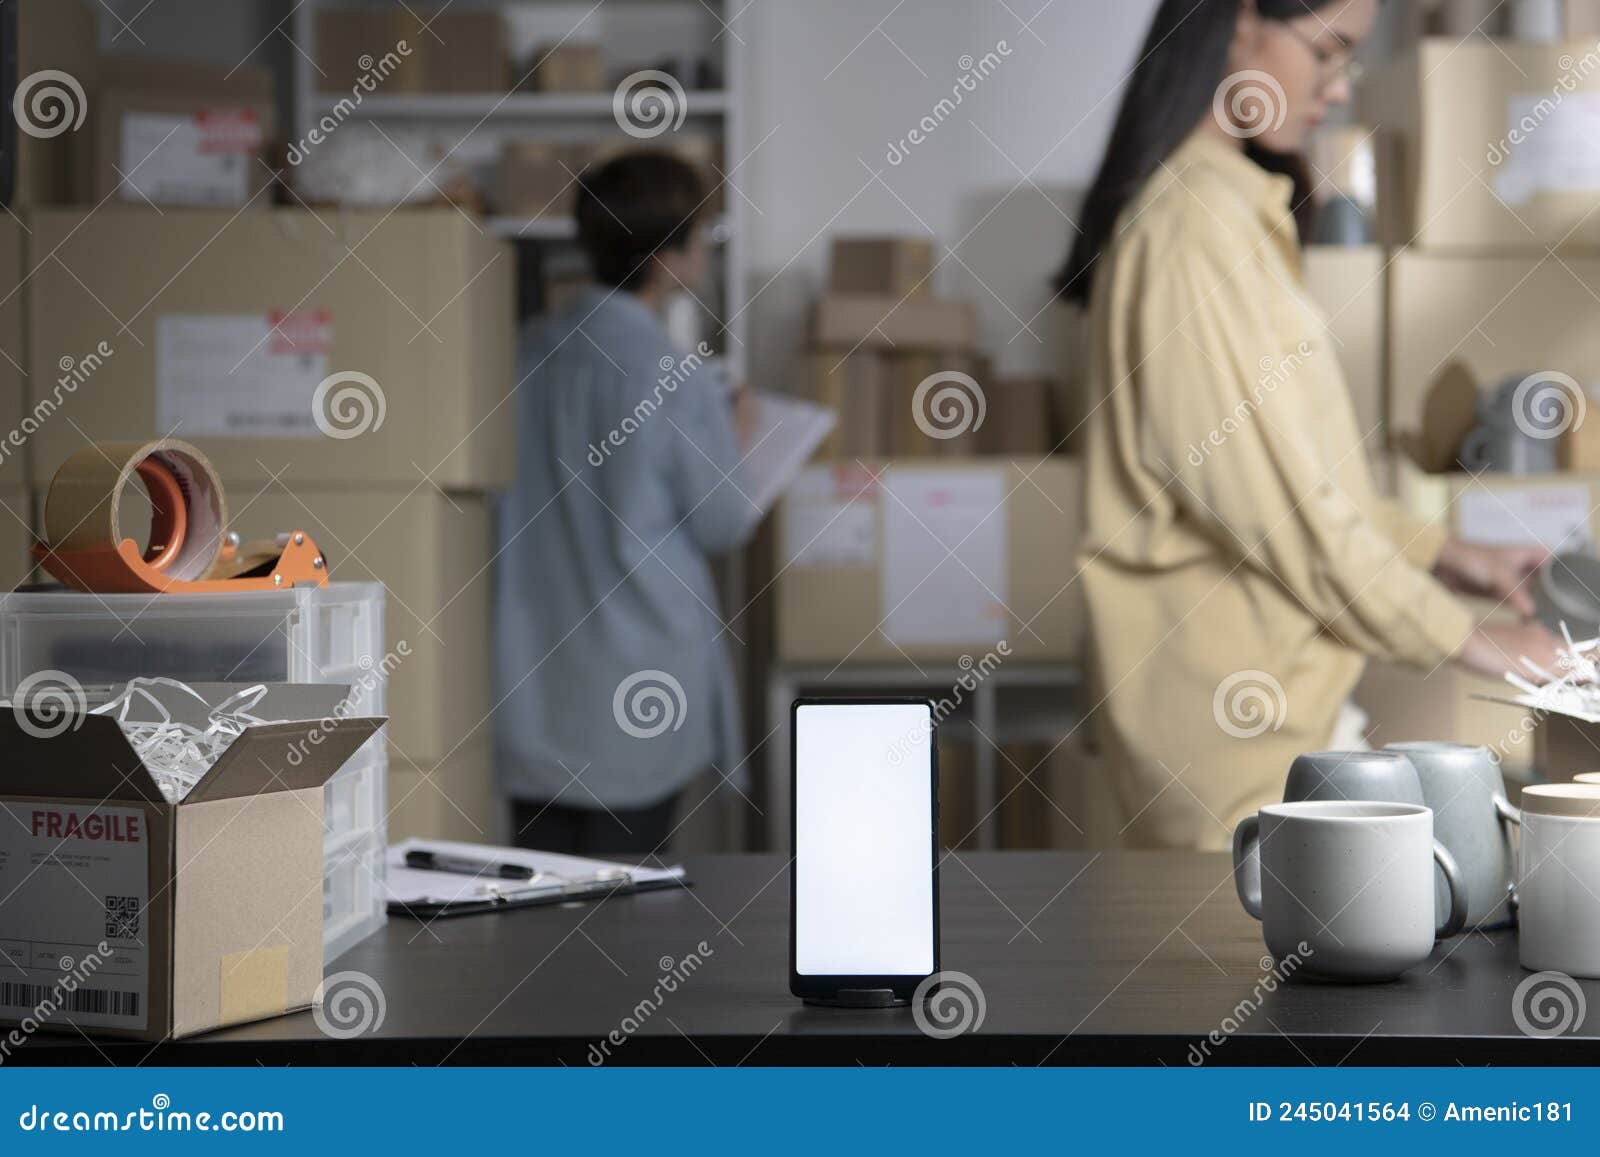 smartphone with blank white screen standing on the desktop in the warehouses. asian women online seller checking stock and invento